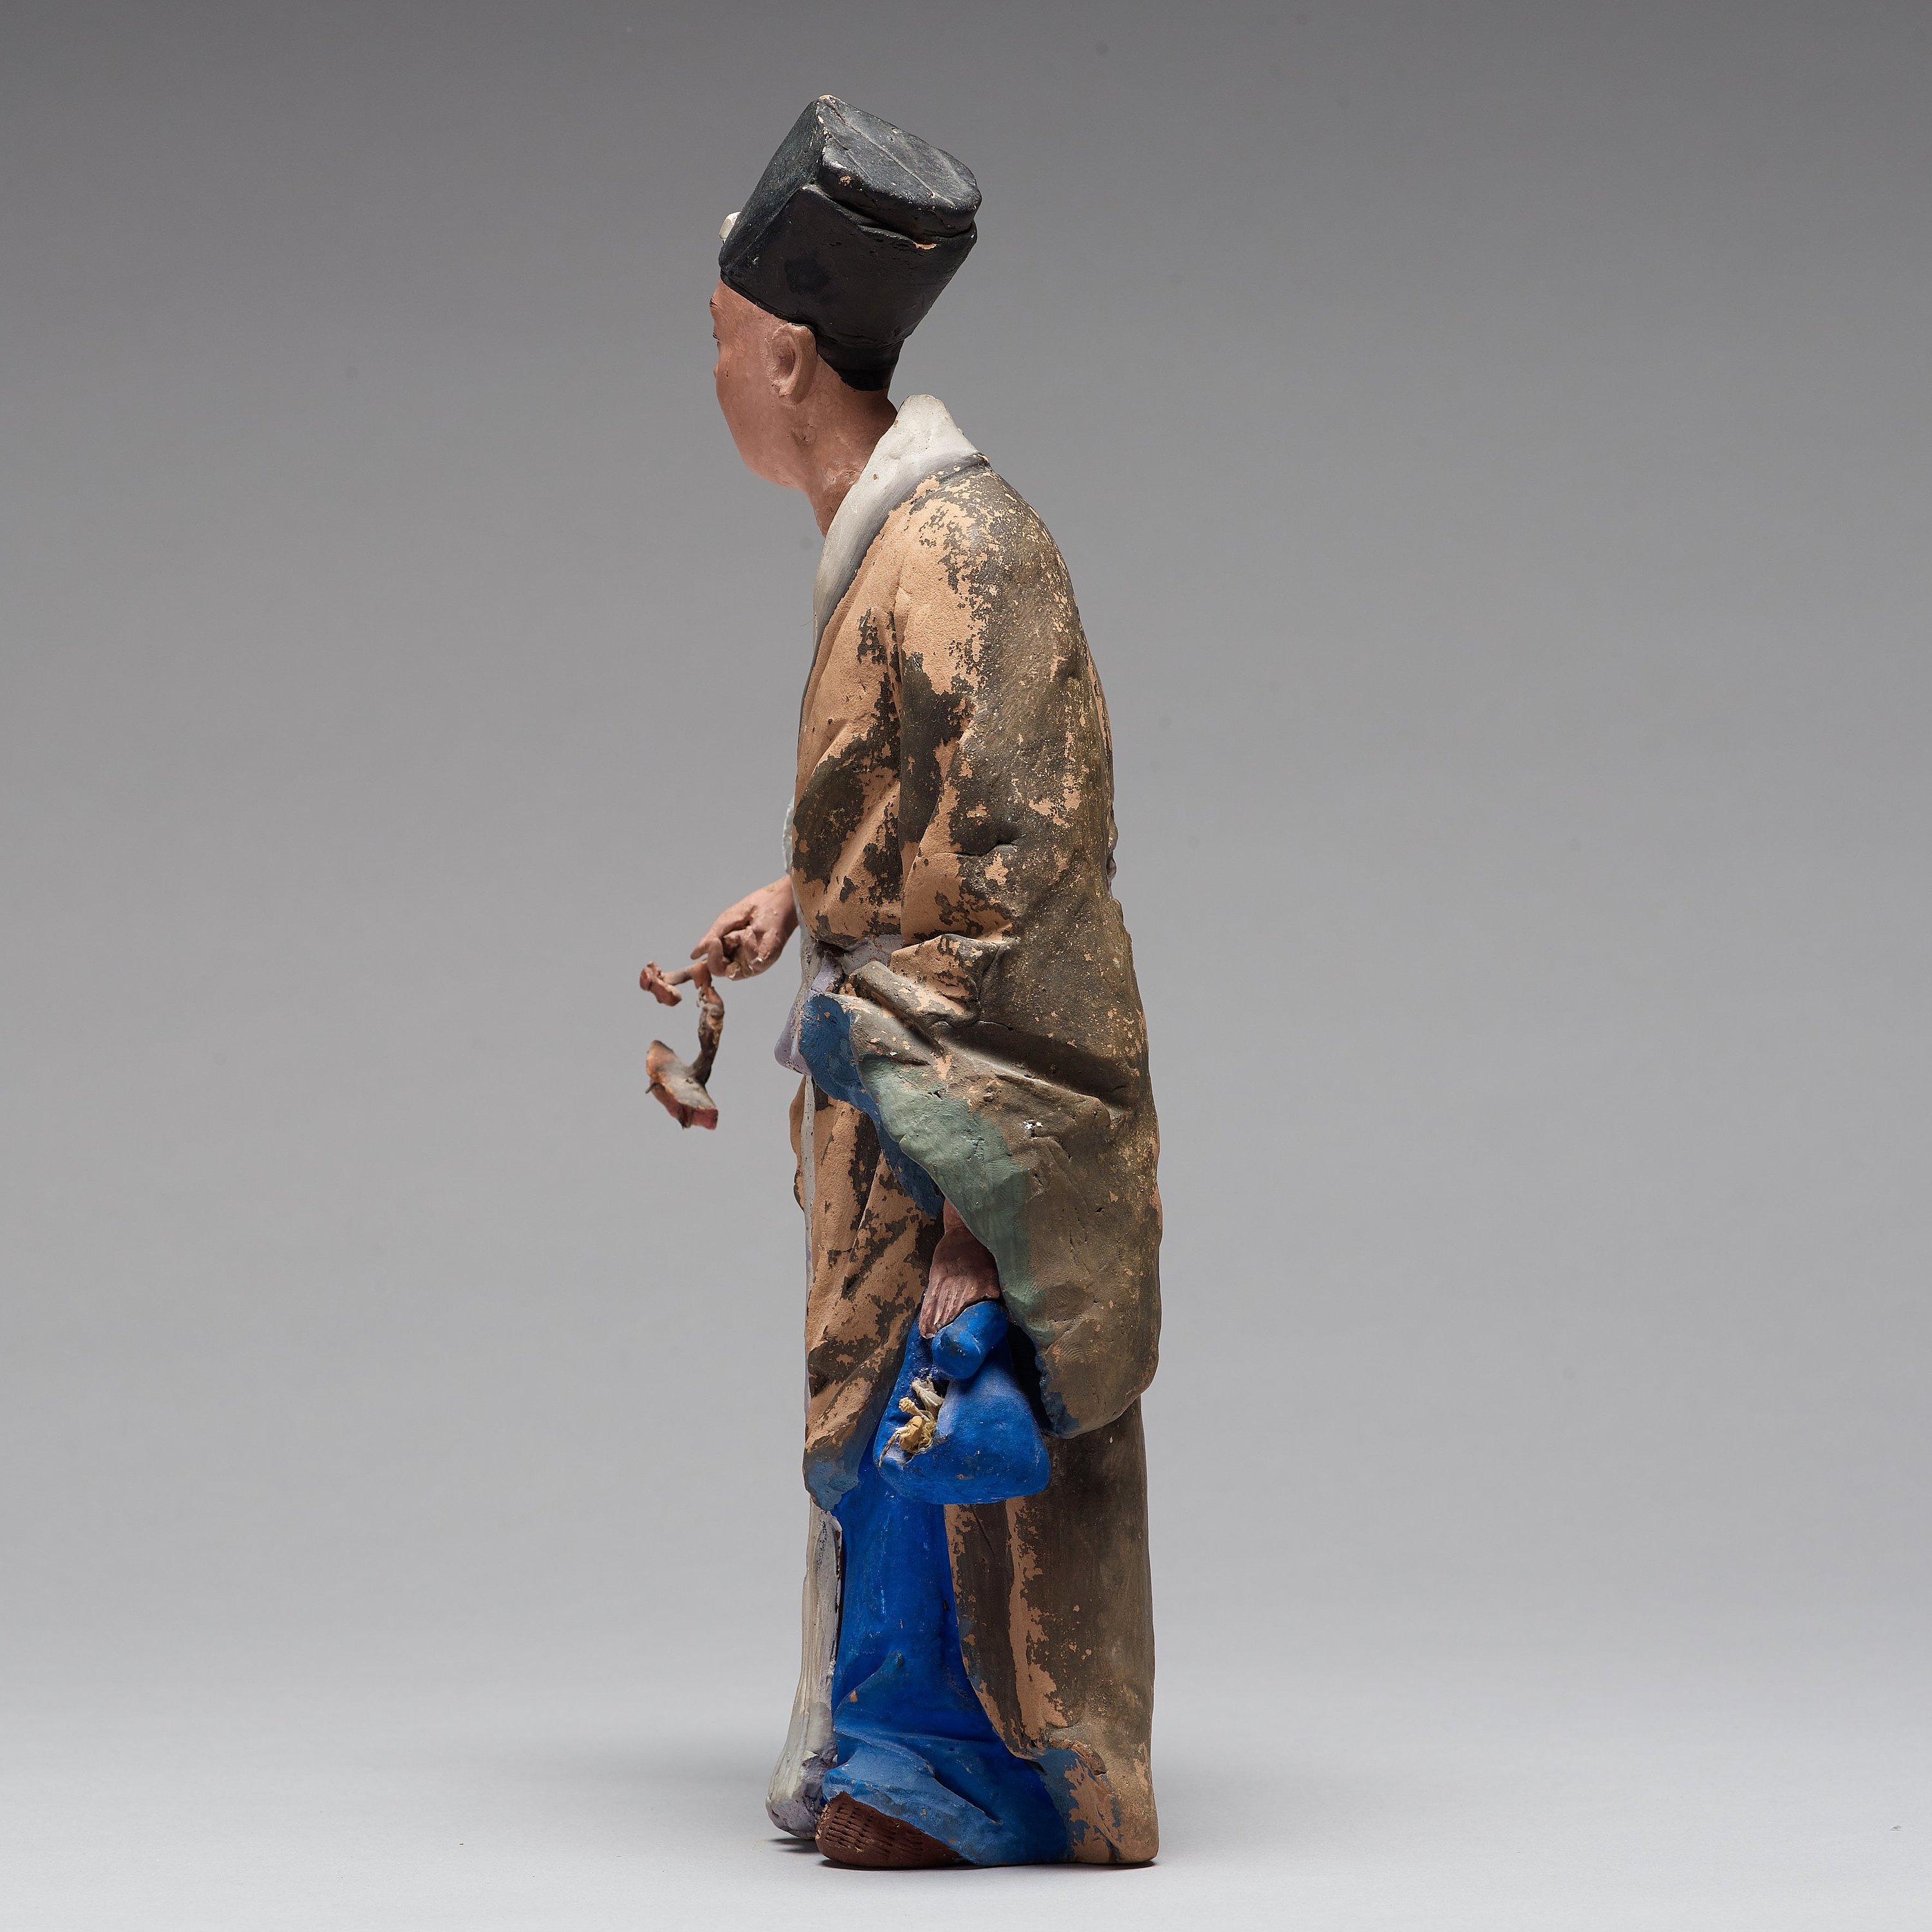 20th Century Chinese Sculptured and Painted Clay Figure of a Man Holding a Lingzhi Mushroom